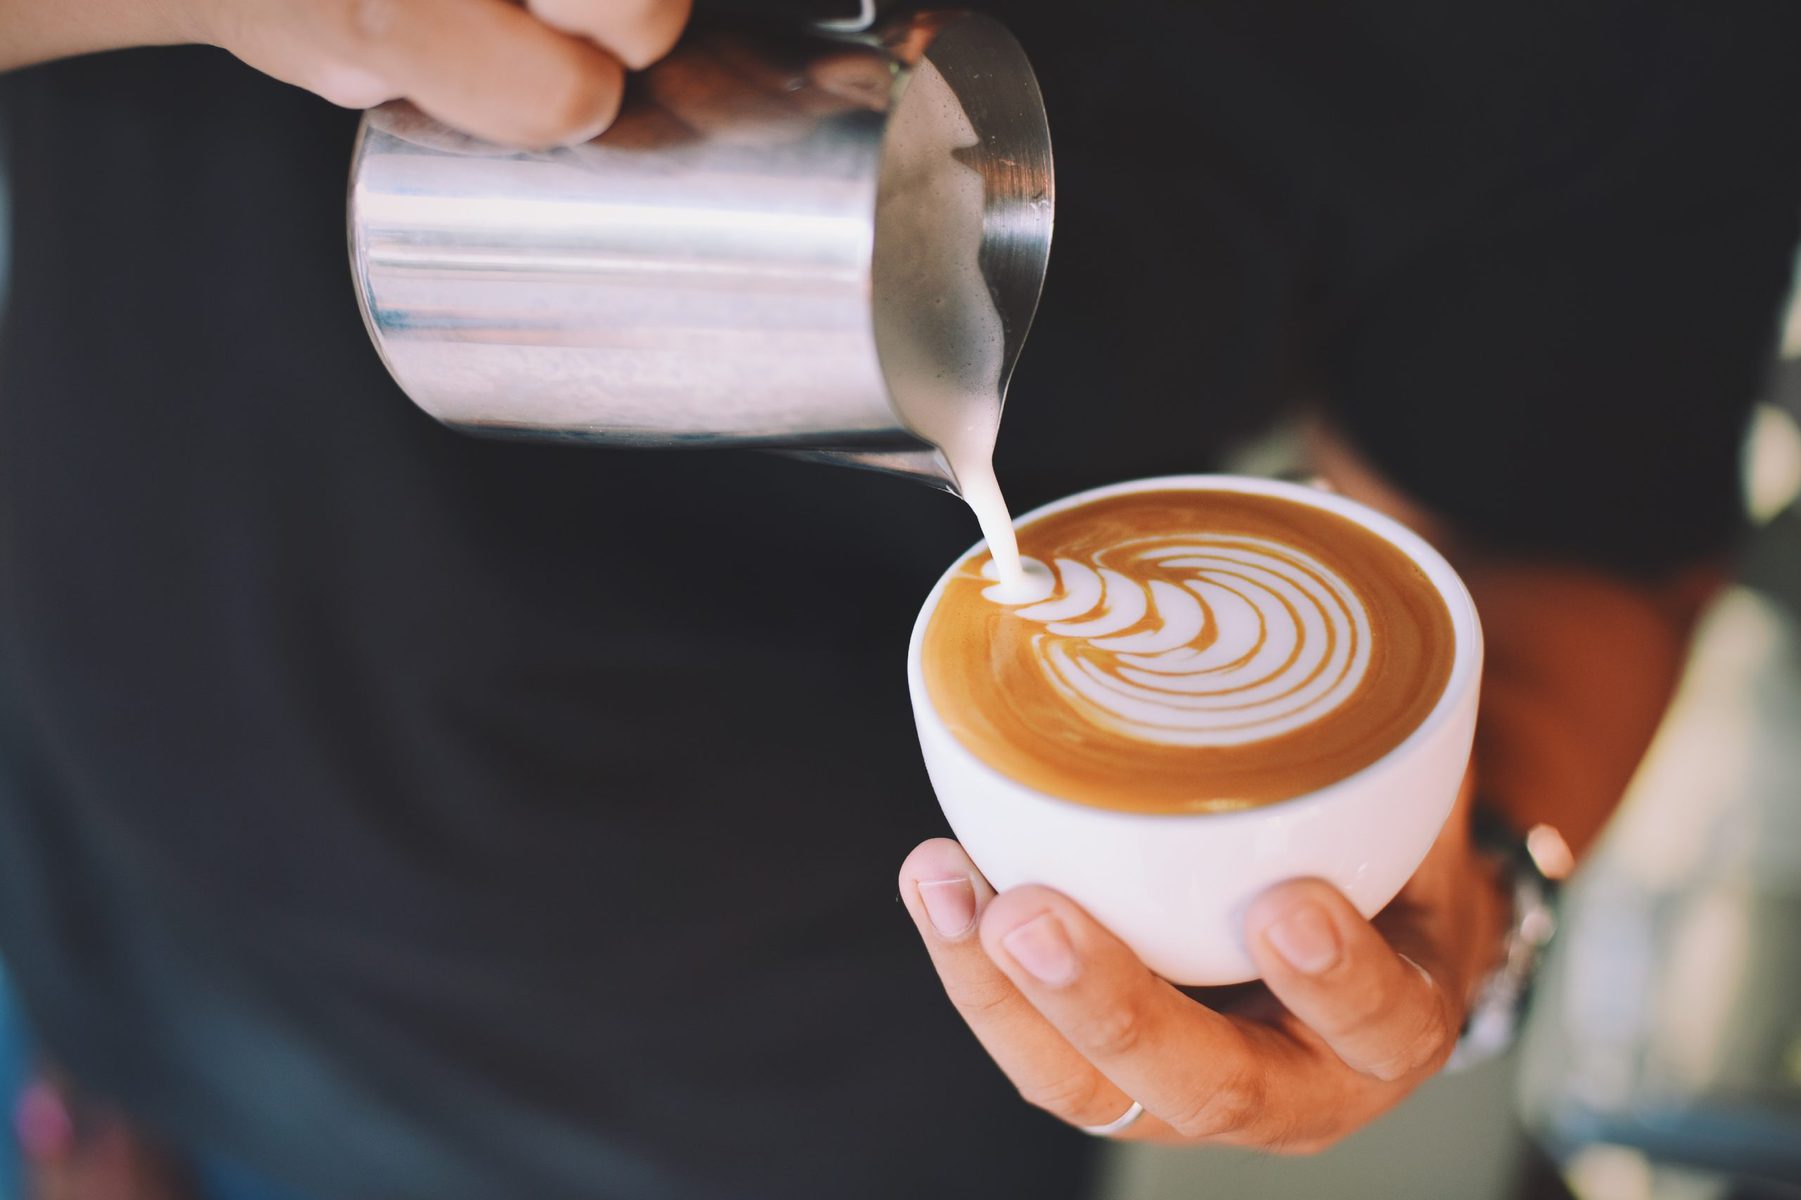 barista creating latte art in a latte cup